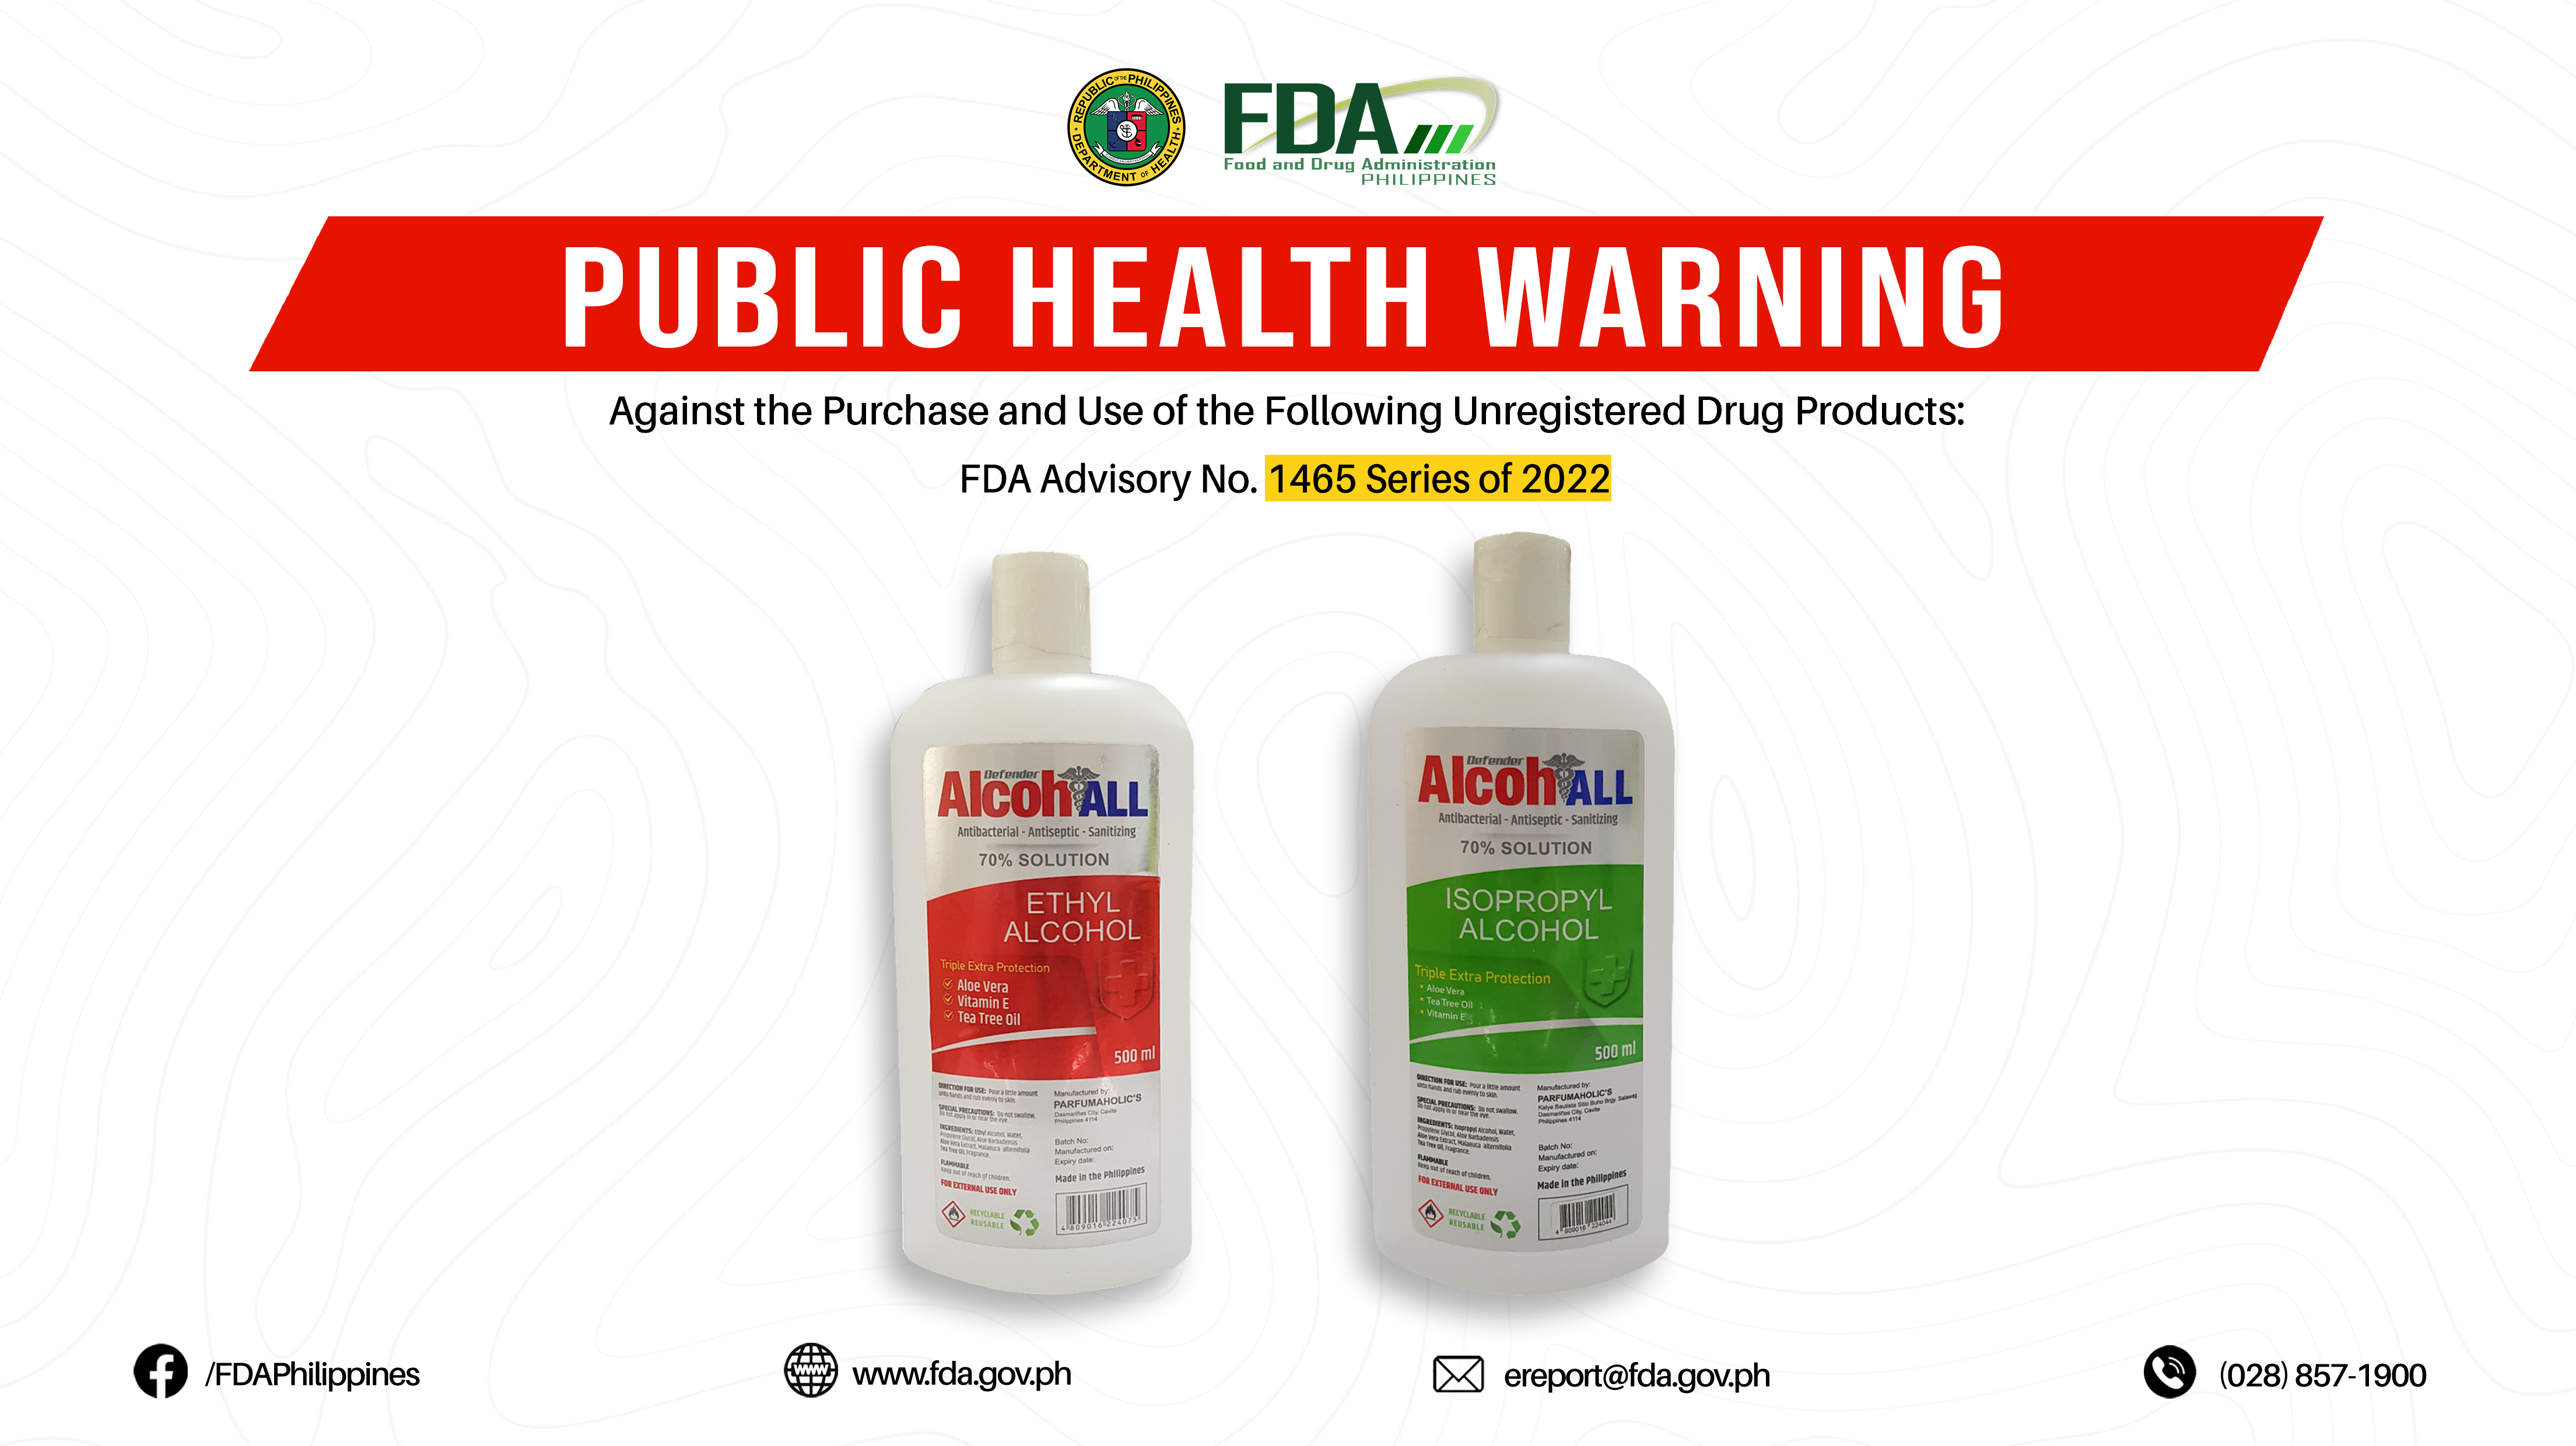 FDA Advisory No.2022-1465 || Public Health Warning Against the Purchase and Use of the Following Unregistered Drug Products: